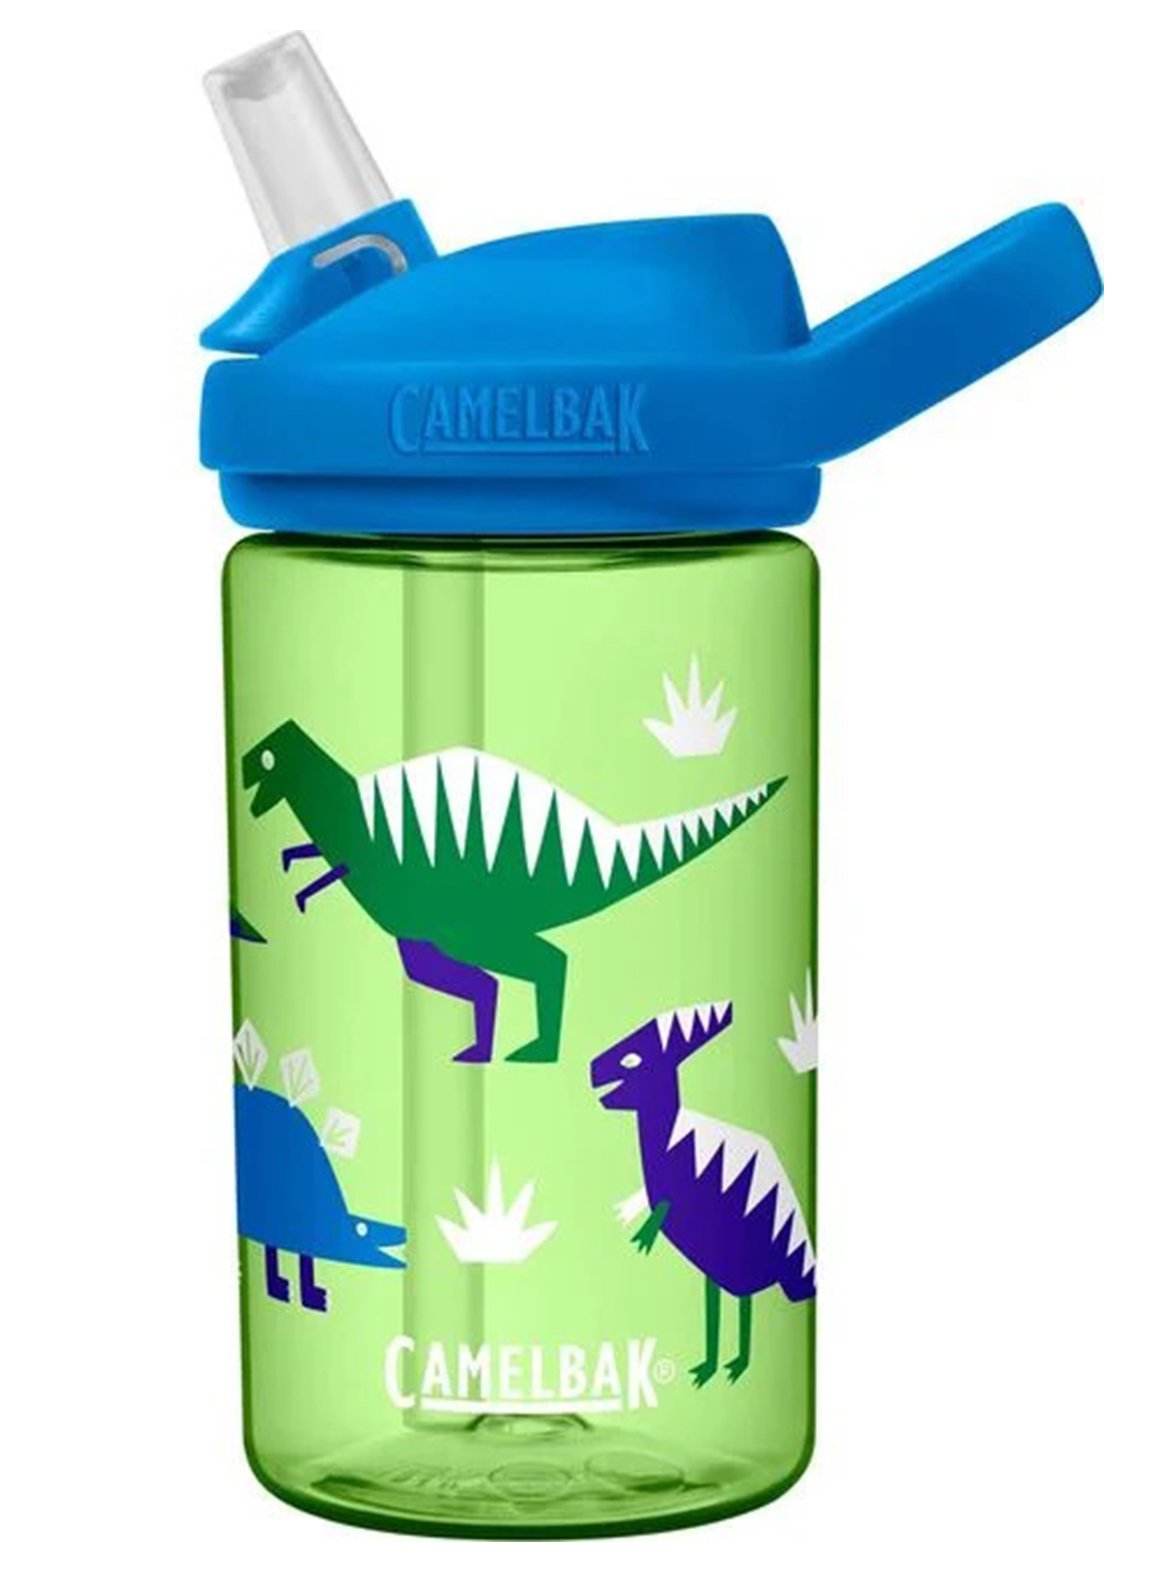 https://cambriabike.com/cdn/shop/products/Camelbakeddy_KidsWaterBottle-14oz-2021_HipDinos_e5a4aed4-1943-4d80-8942-08544694d601.jpg?v=1620900164&width=2048